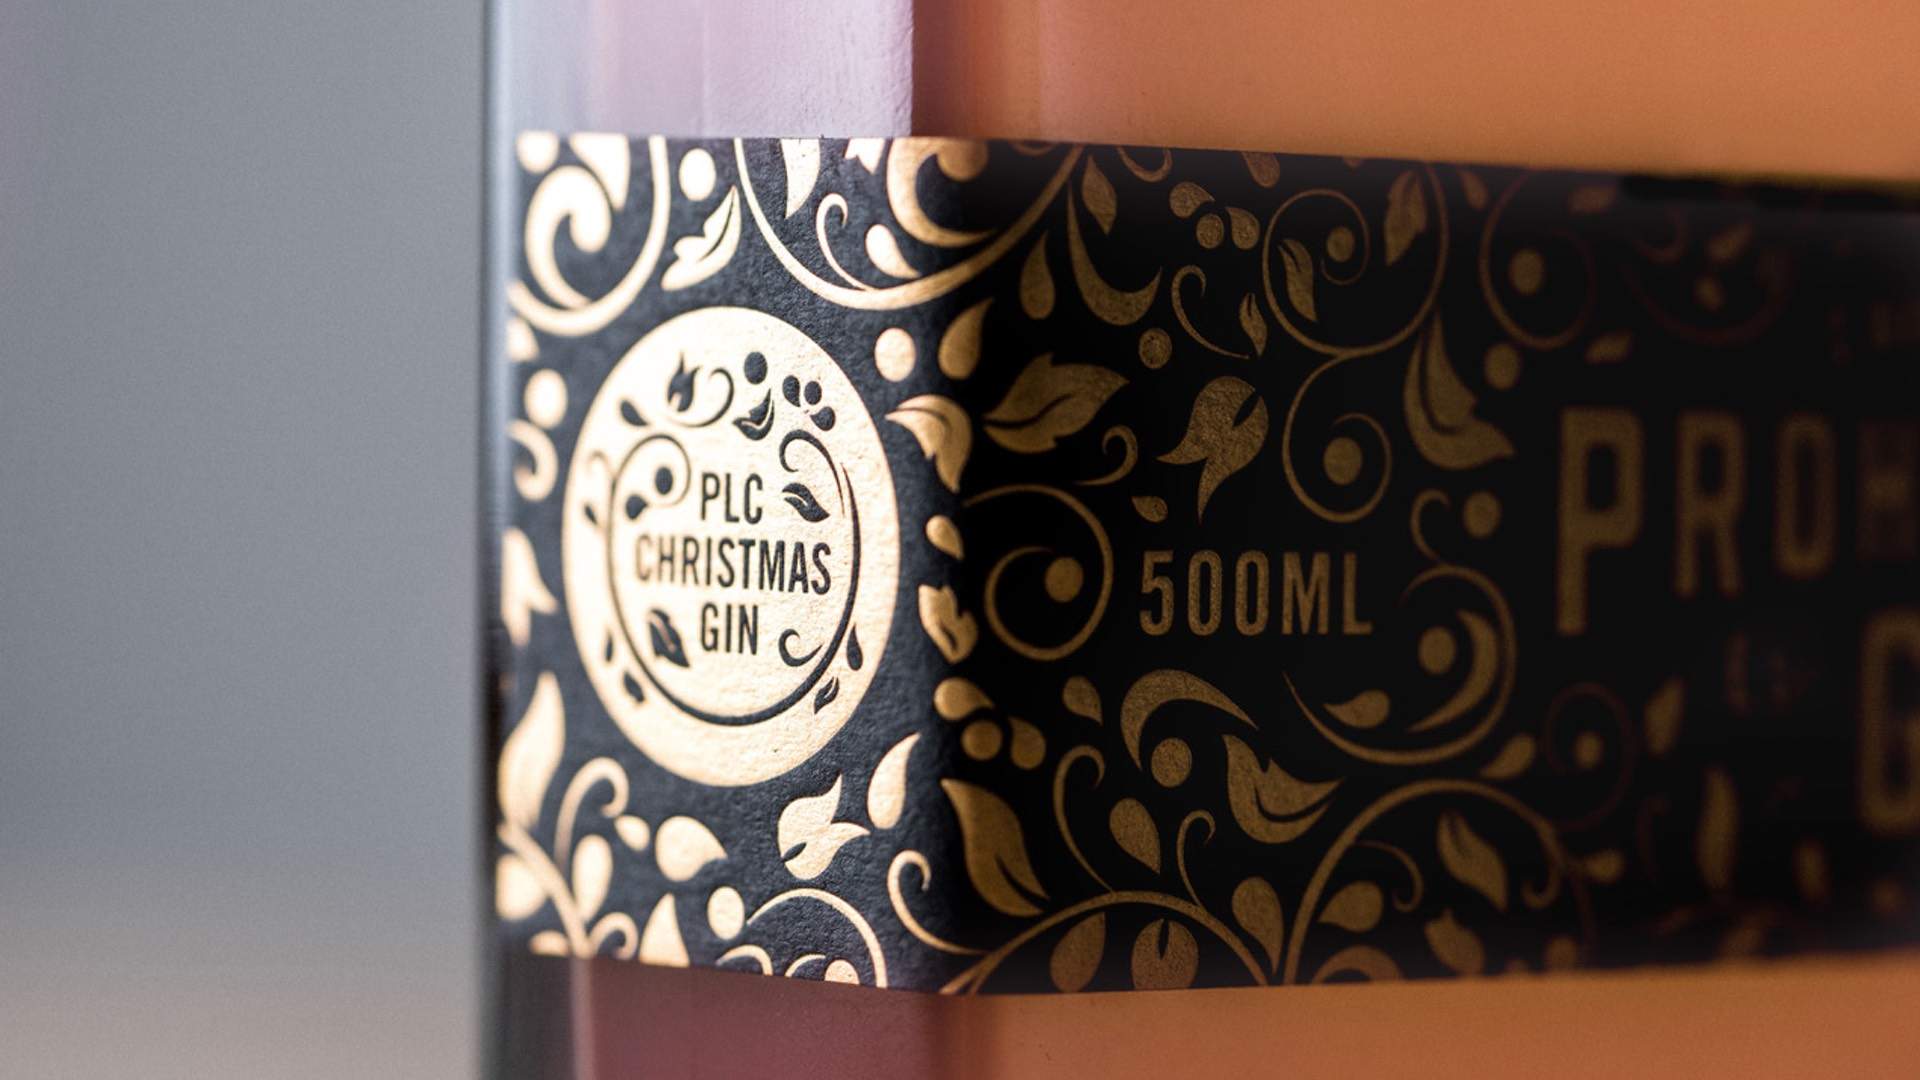 This South Australian Distillery Has Unveiled Its Festive 2018 Christmas Gin